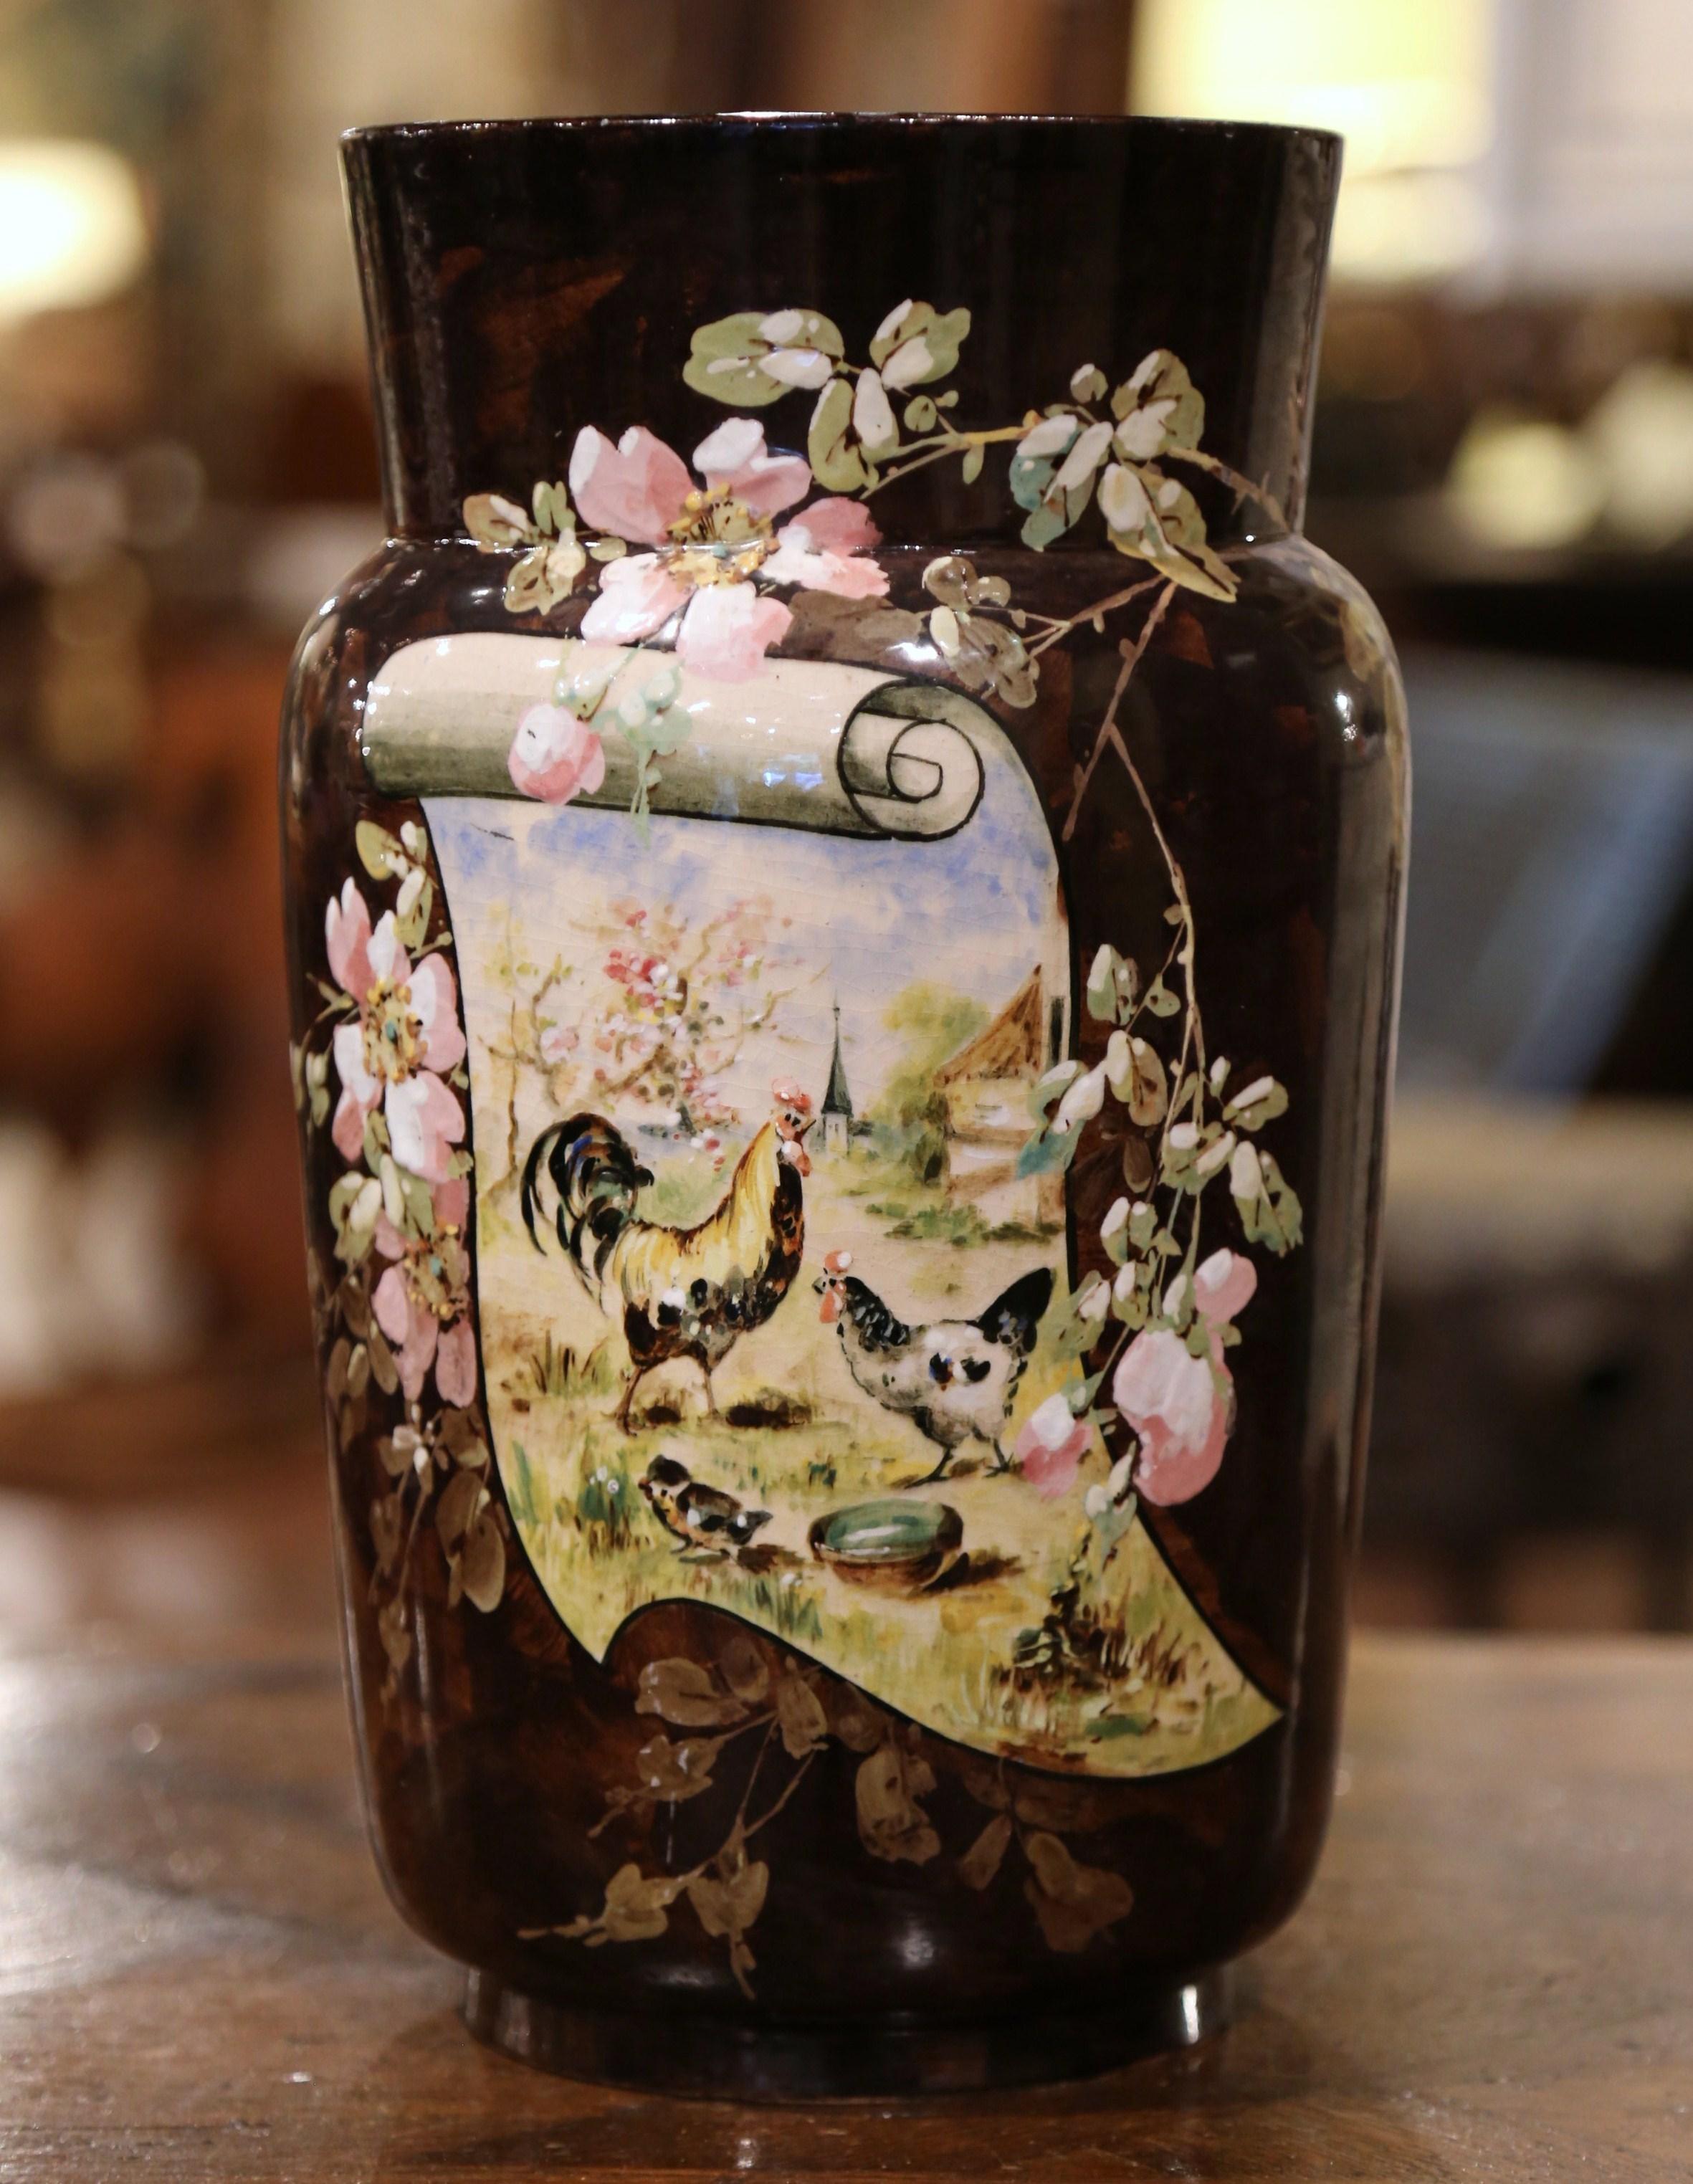 This large hand painted antique vase was created in France circa 1865, made of Majolica, the colorful vase depicts a hand painted scene with rooster and chicken and embellished with floral motifs at the pediment and both sides. The elegant porcelain